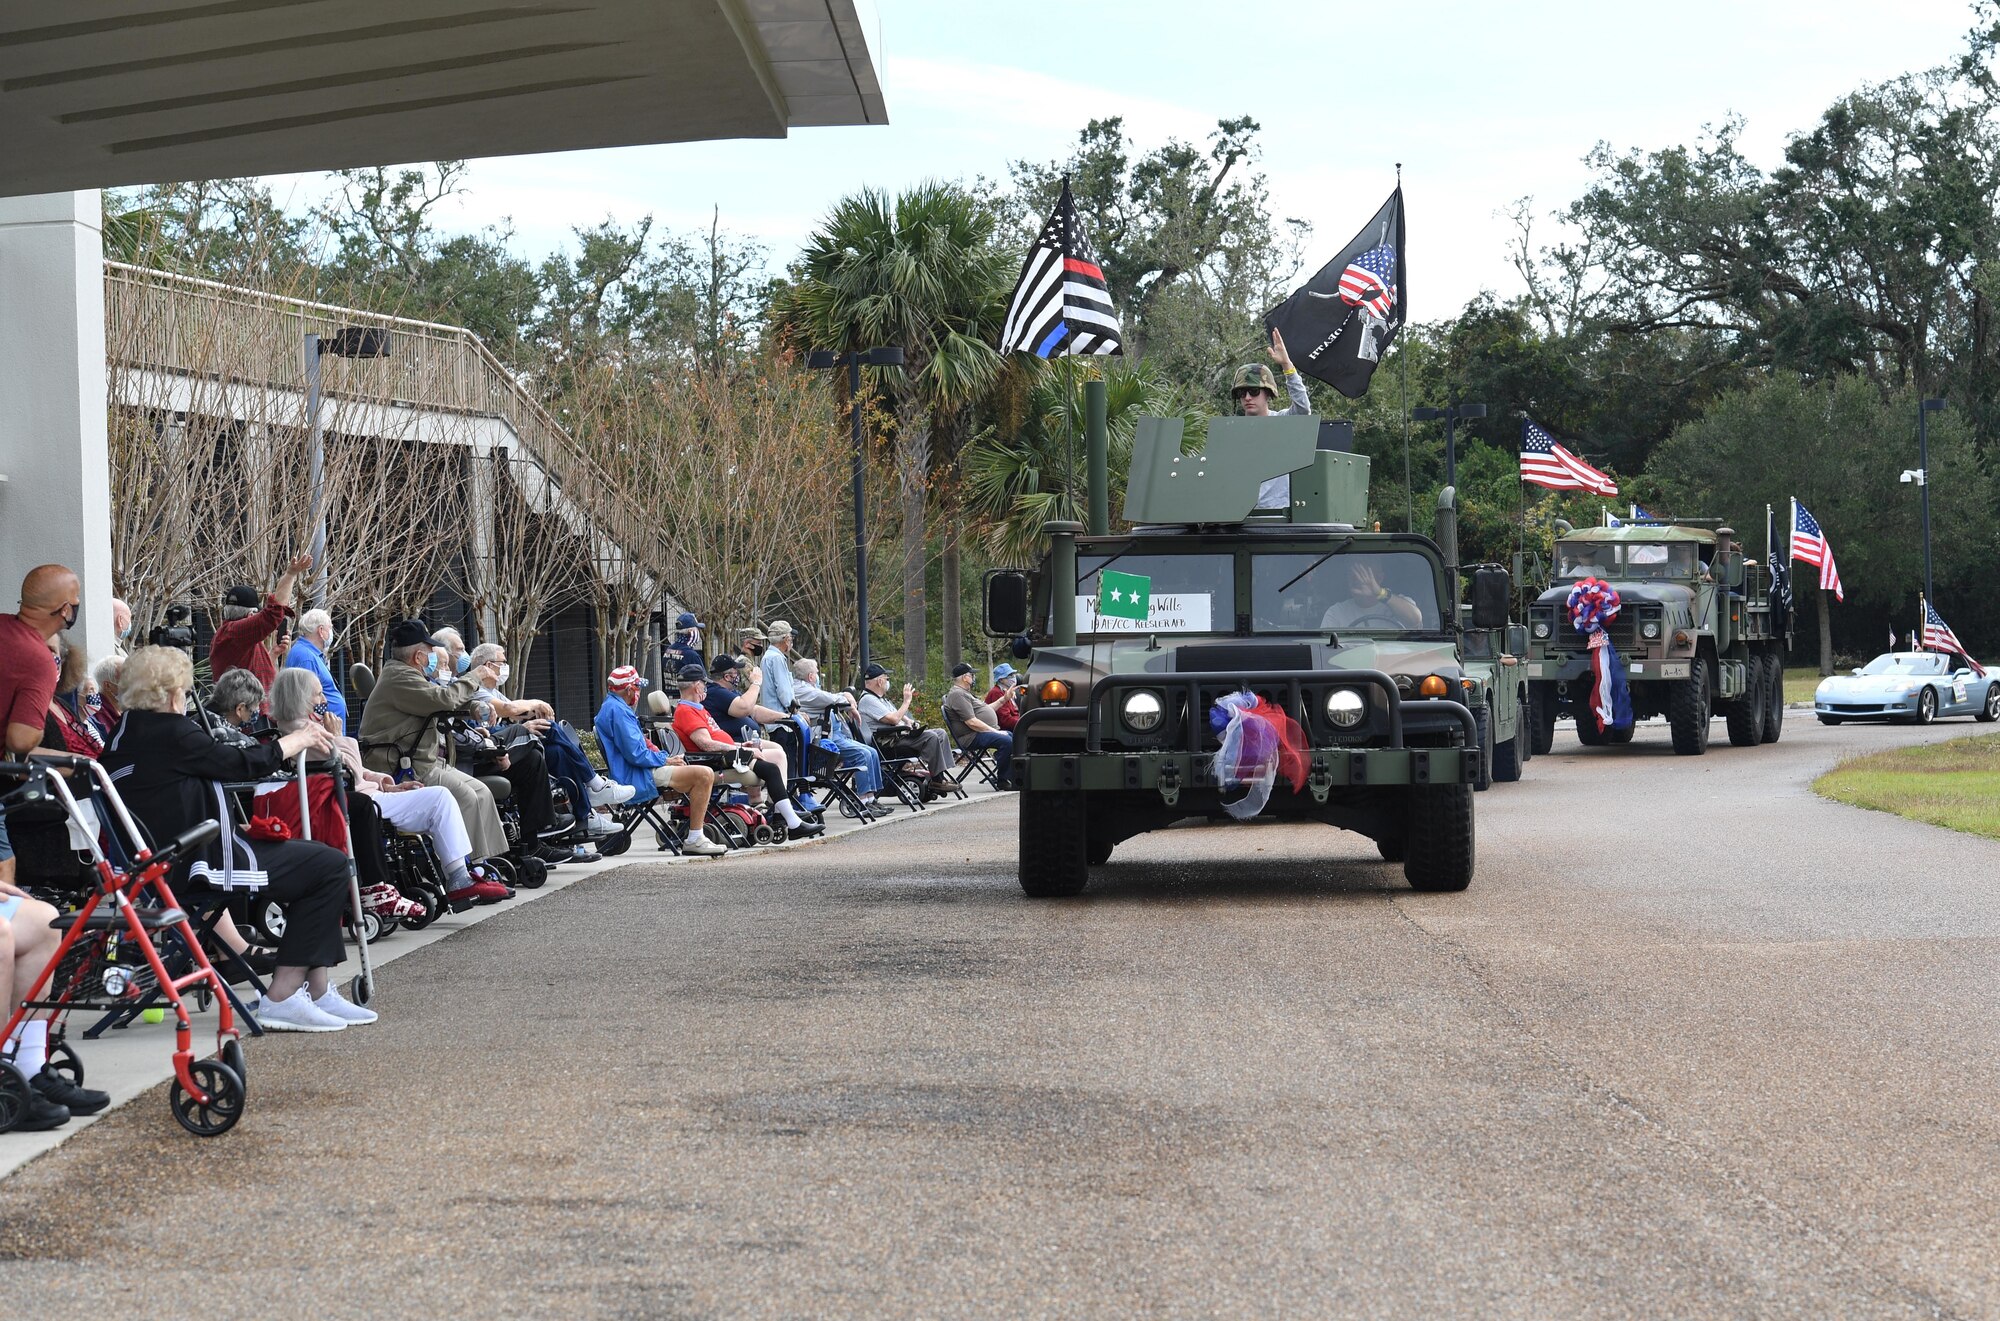 U.S. Air Force Maj. Gen. Craig Wills, Nineteenth Air Force commander, Joint Base San Antonio-Randolph, Texas, rides in the Gulf Coast Veteran's Day Roll-Thru and Wave Parade outside the Armed Forces Retirement Home at Gulfport, Mississippi, Nov. 7, 2020. Keesler Air Force Base leadership also participated in the parade in support of all veterans past and present. (U.S. Air Force photo by Kemberly Groue)